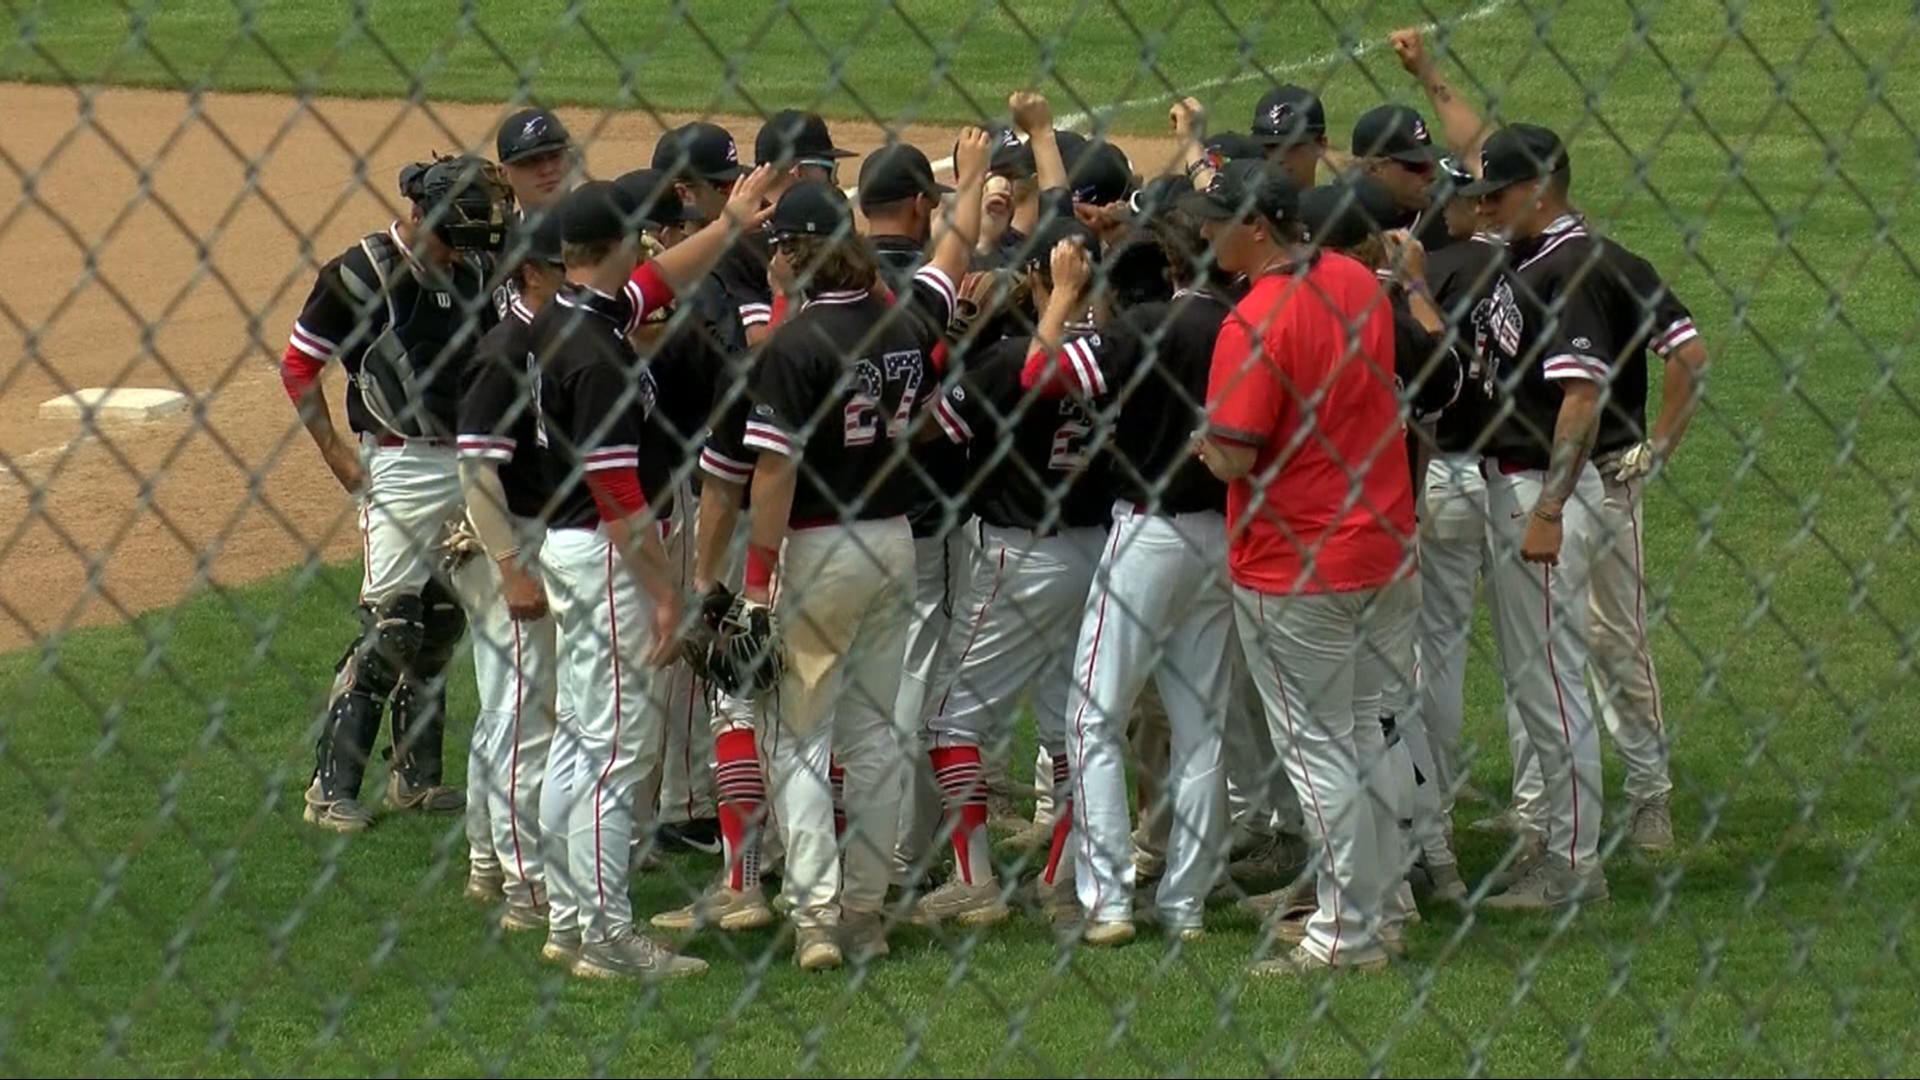 The baseball program at Owens Community College was cut just a few years ago. Not only are they back, but they're also reaching new heights.